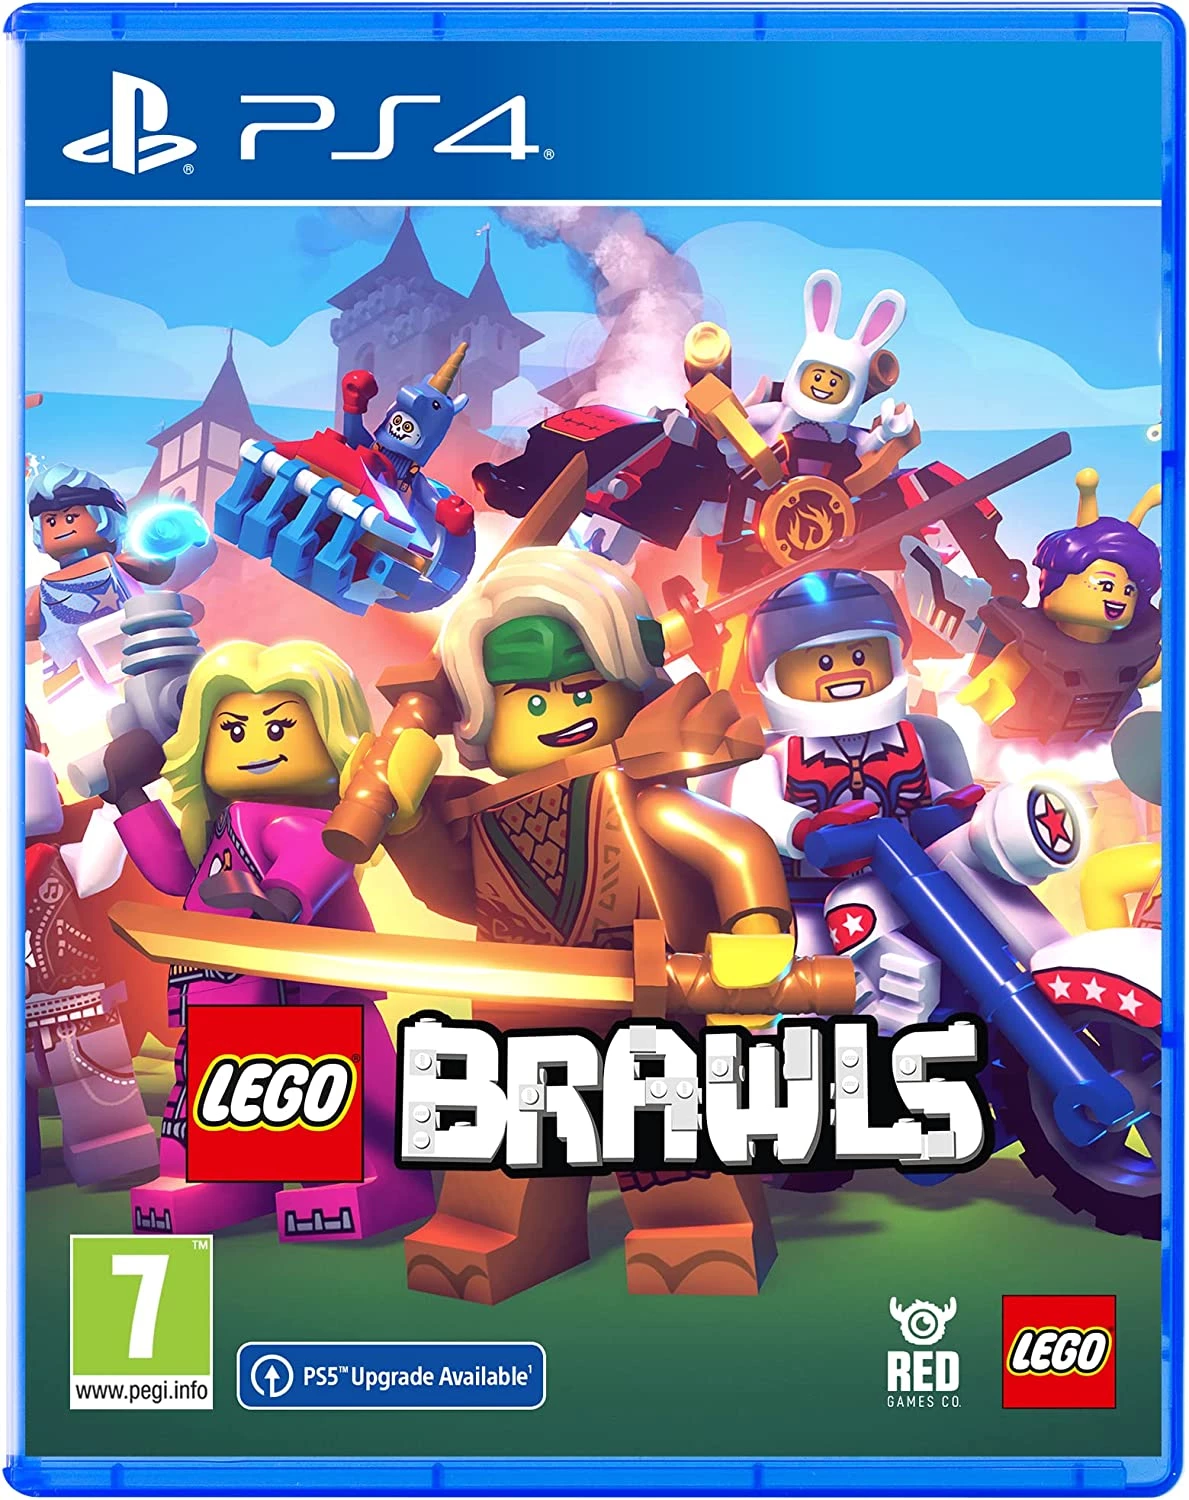 LEGO Brawls (PS4), Red Games Co.